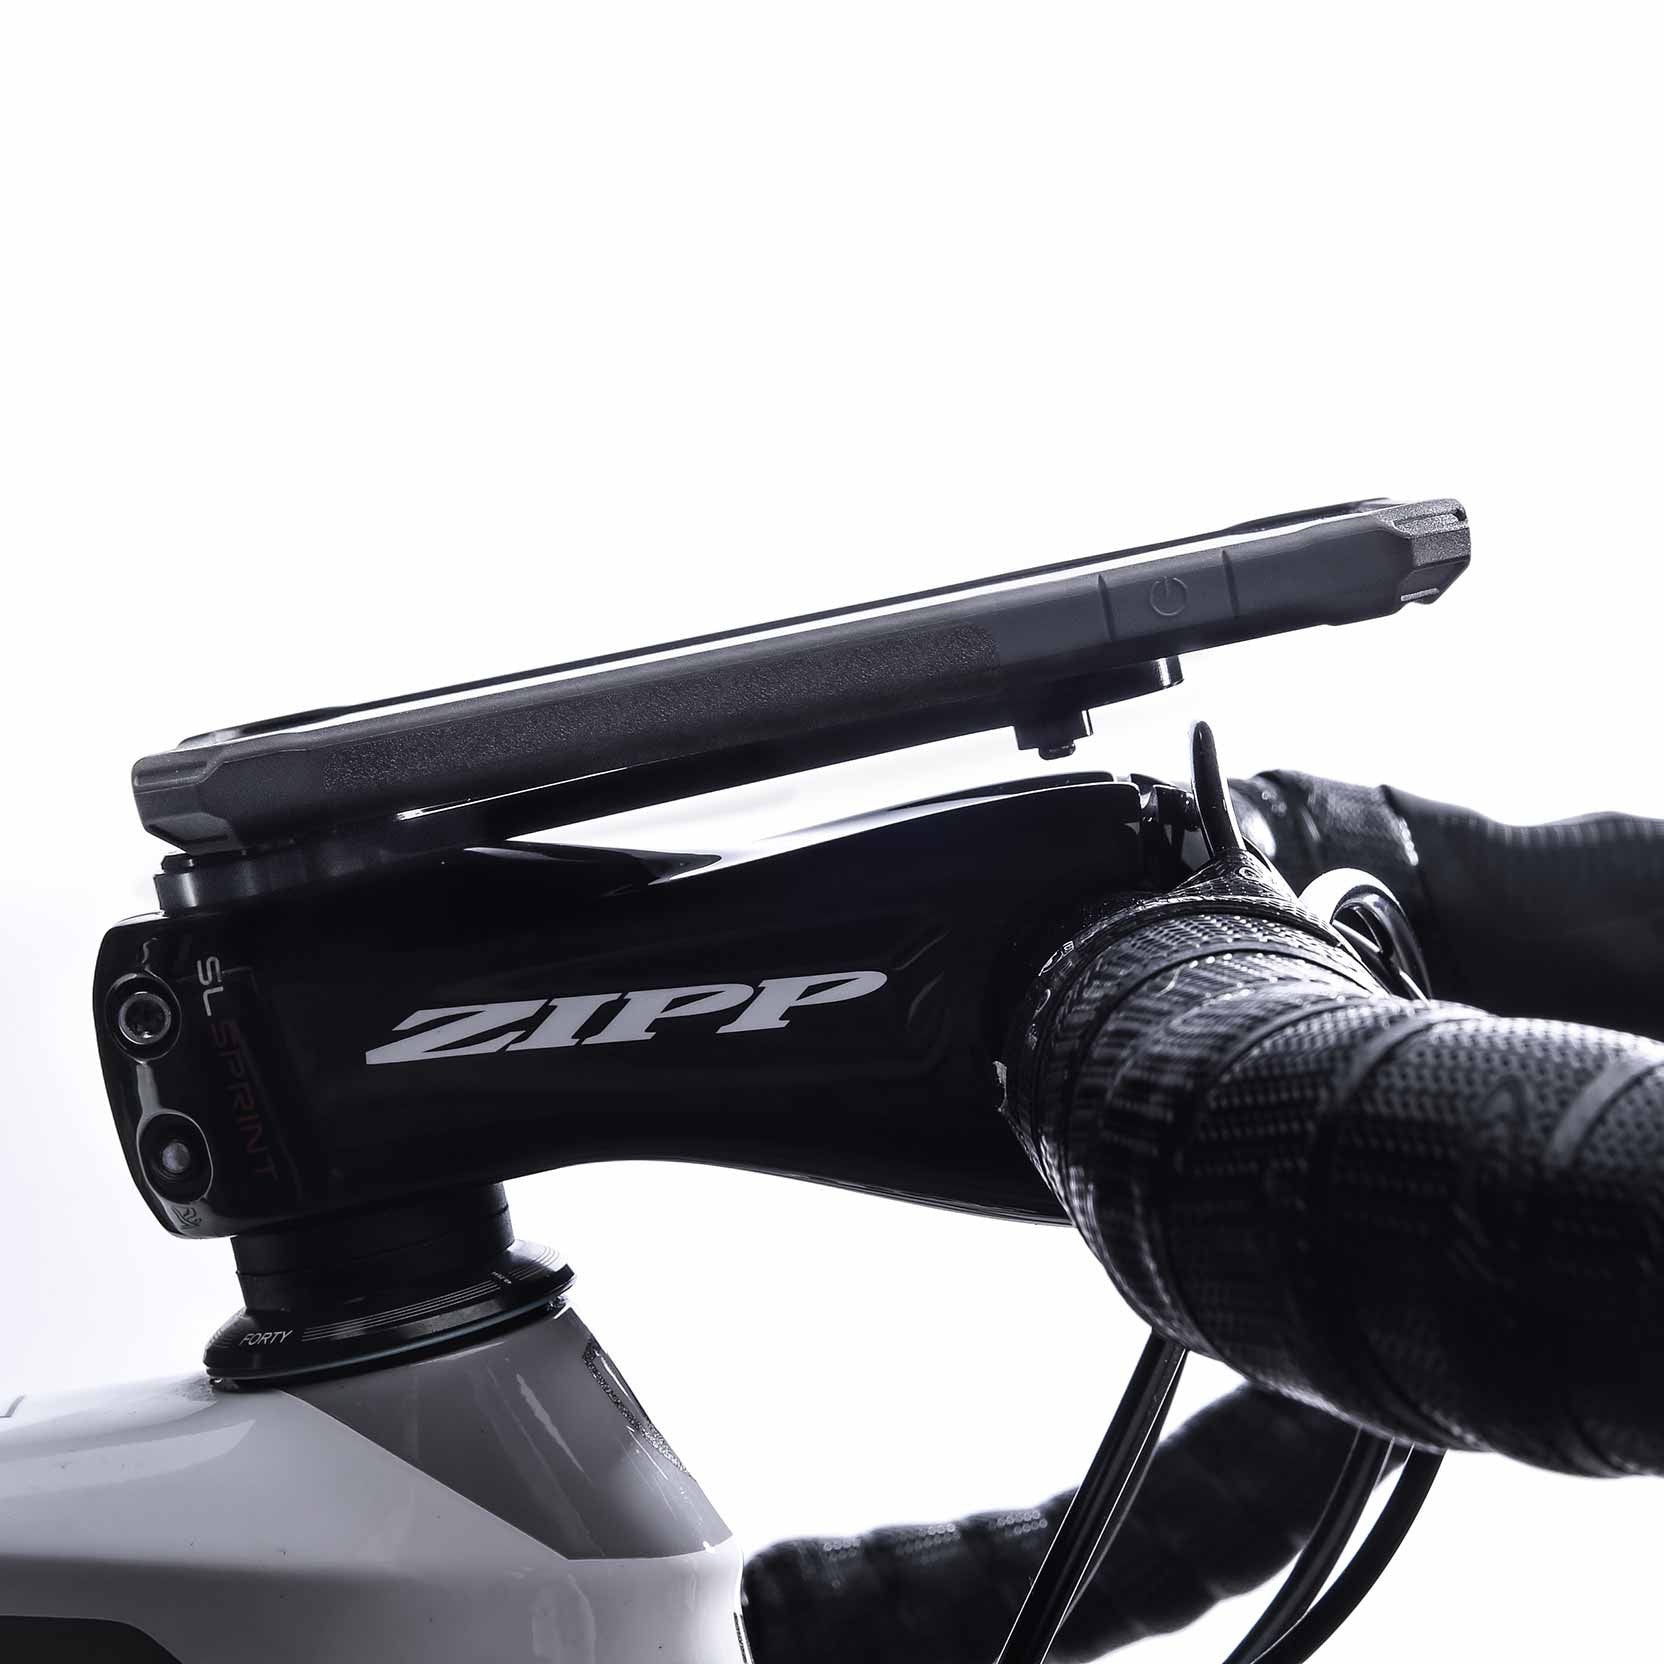 iphone clamp for bike